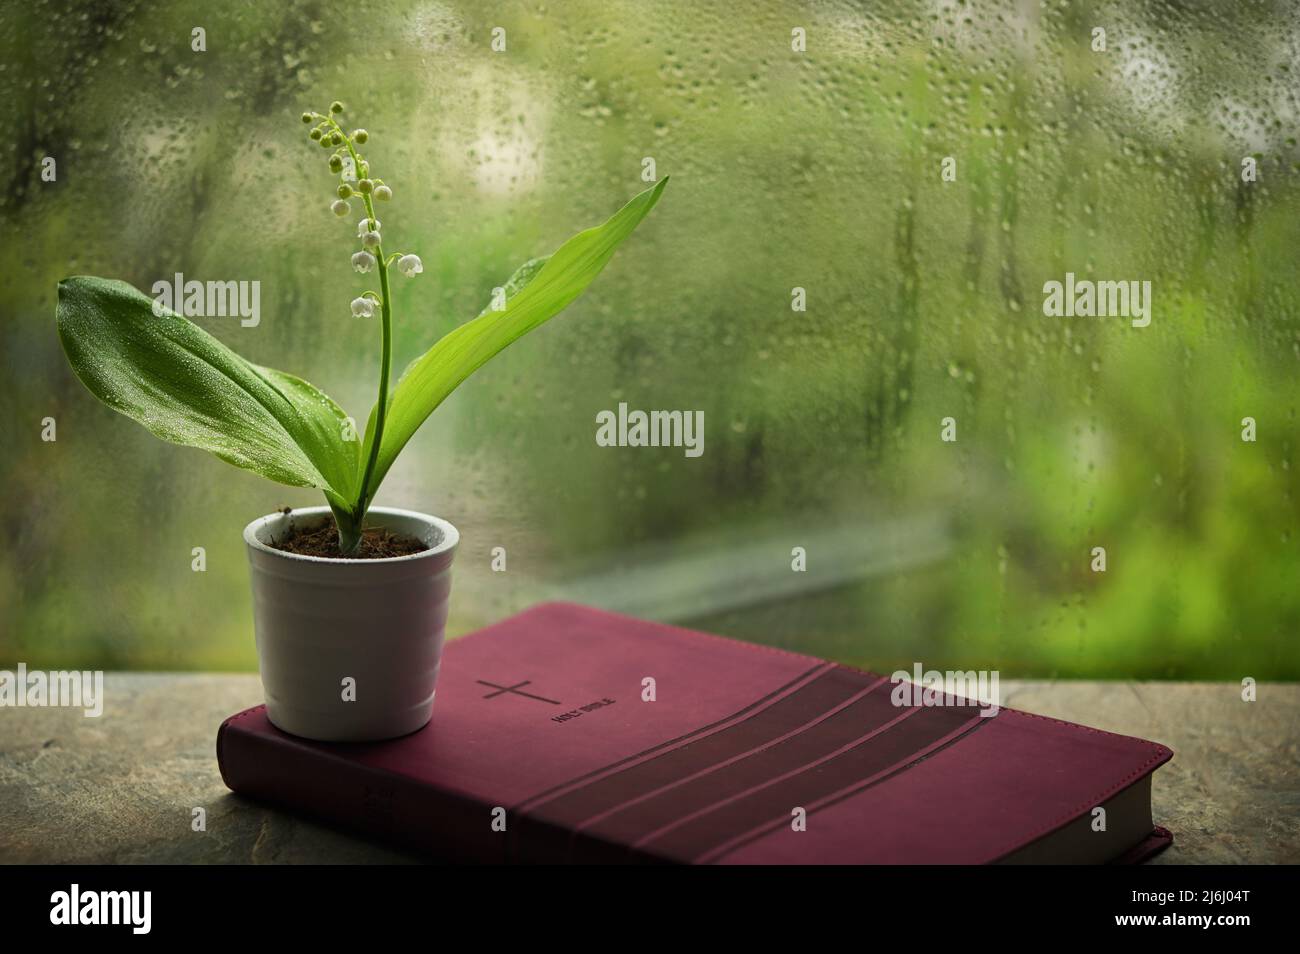 Rainy Spring with  Lily Of The Valley on Bible Stock Photo